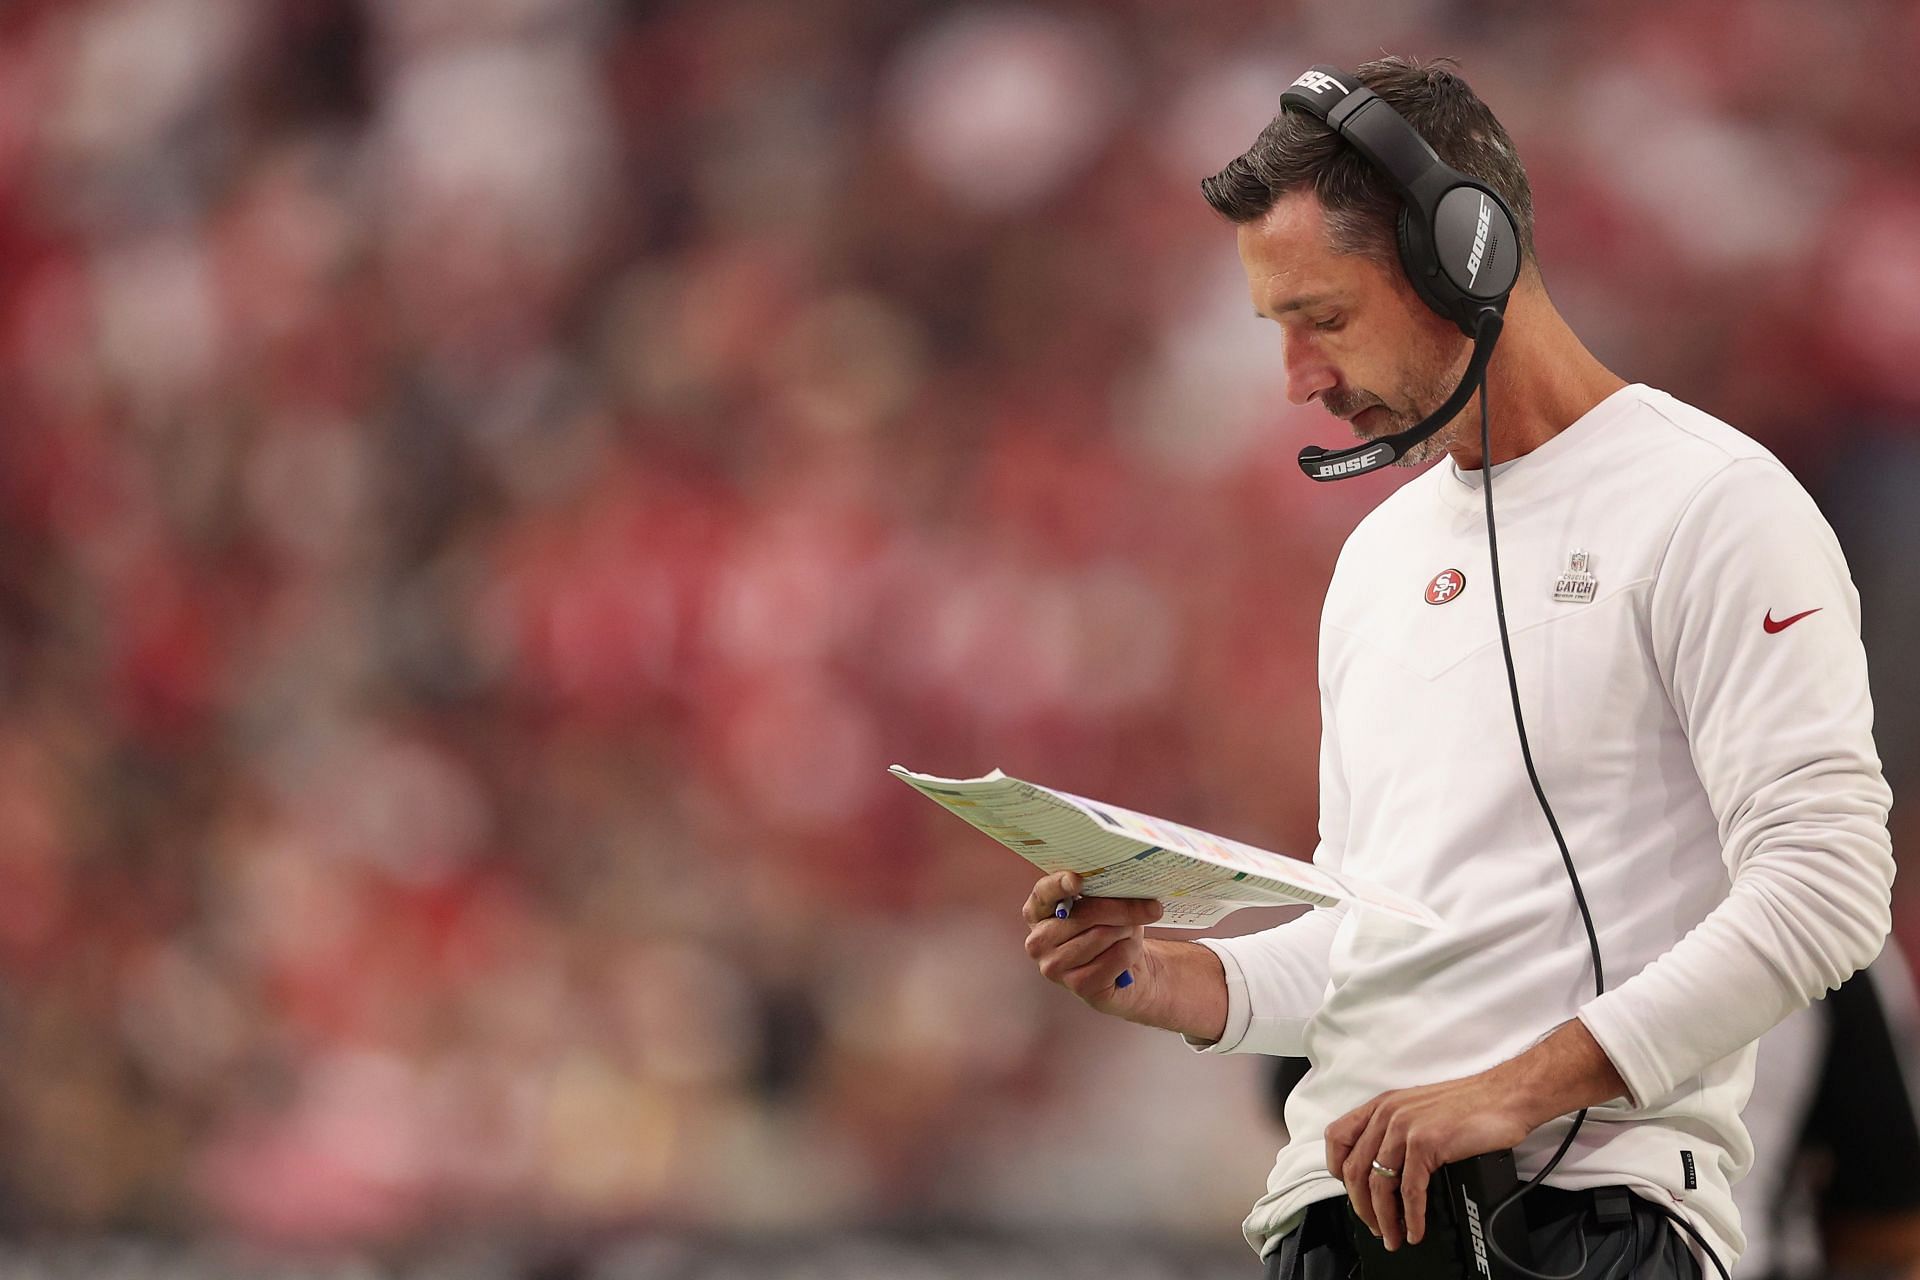 San Francisco 49ers head coach Kyle Shanahan may have more control than others in his position